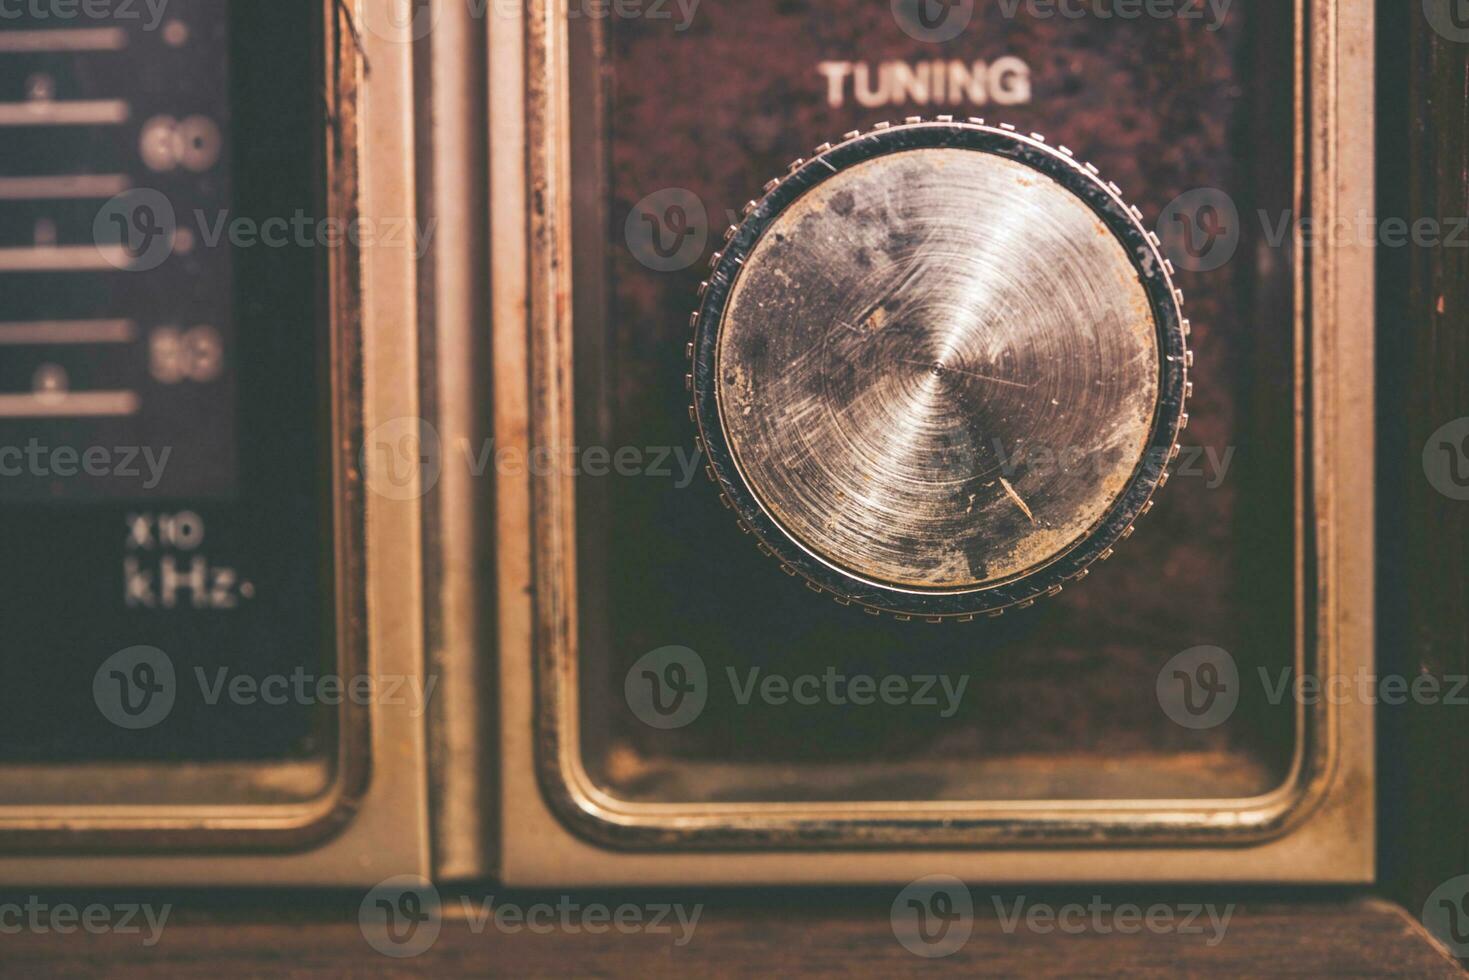 Vintage Tuning Dial in Radio photo